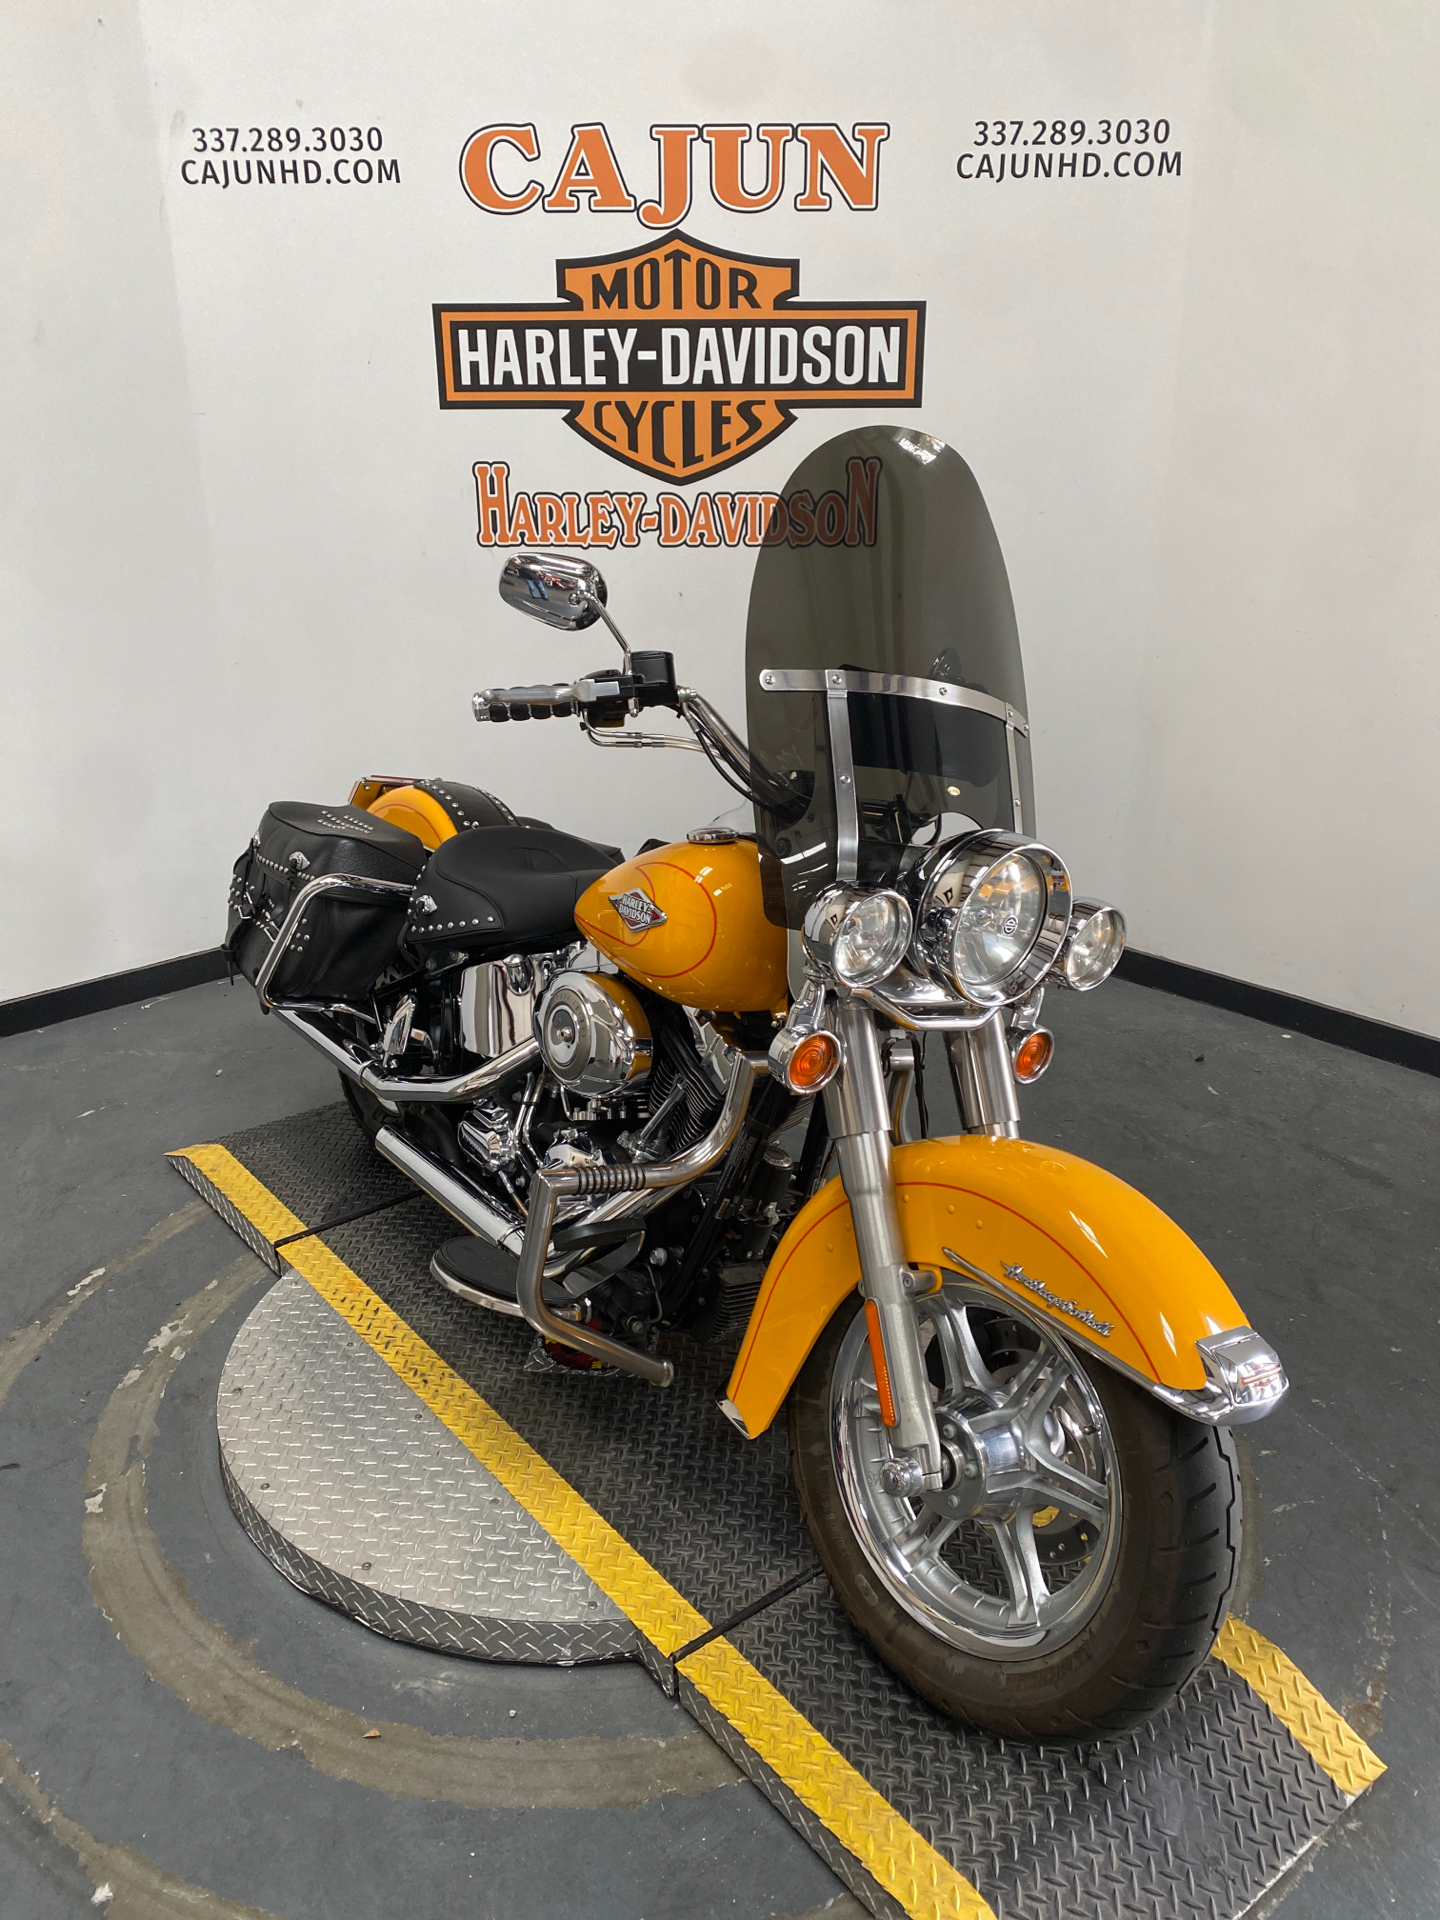 2011 Harley-Davidson Heritage Softail Special yellow - Photo 5